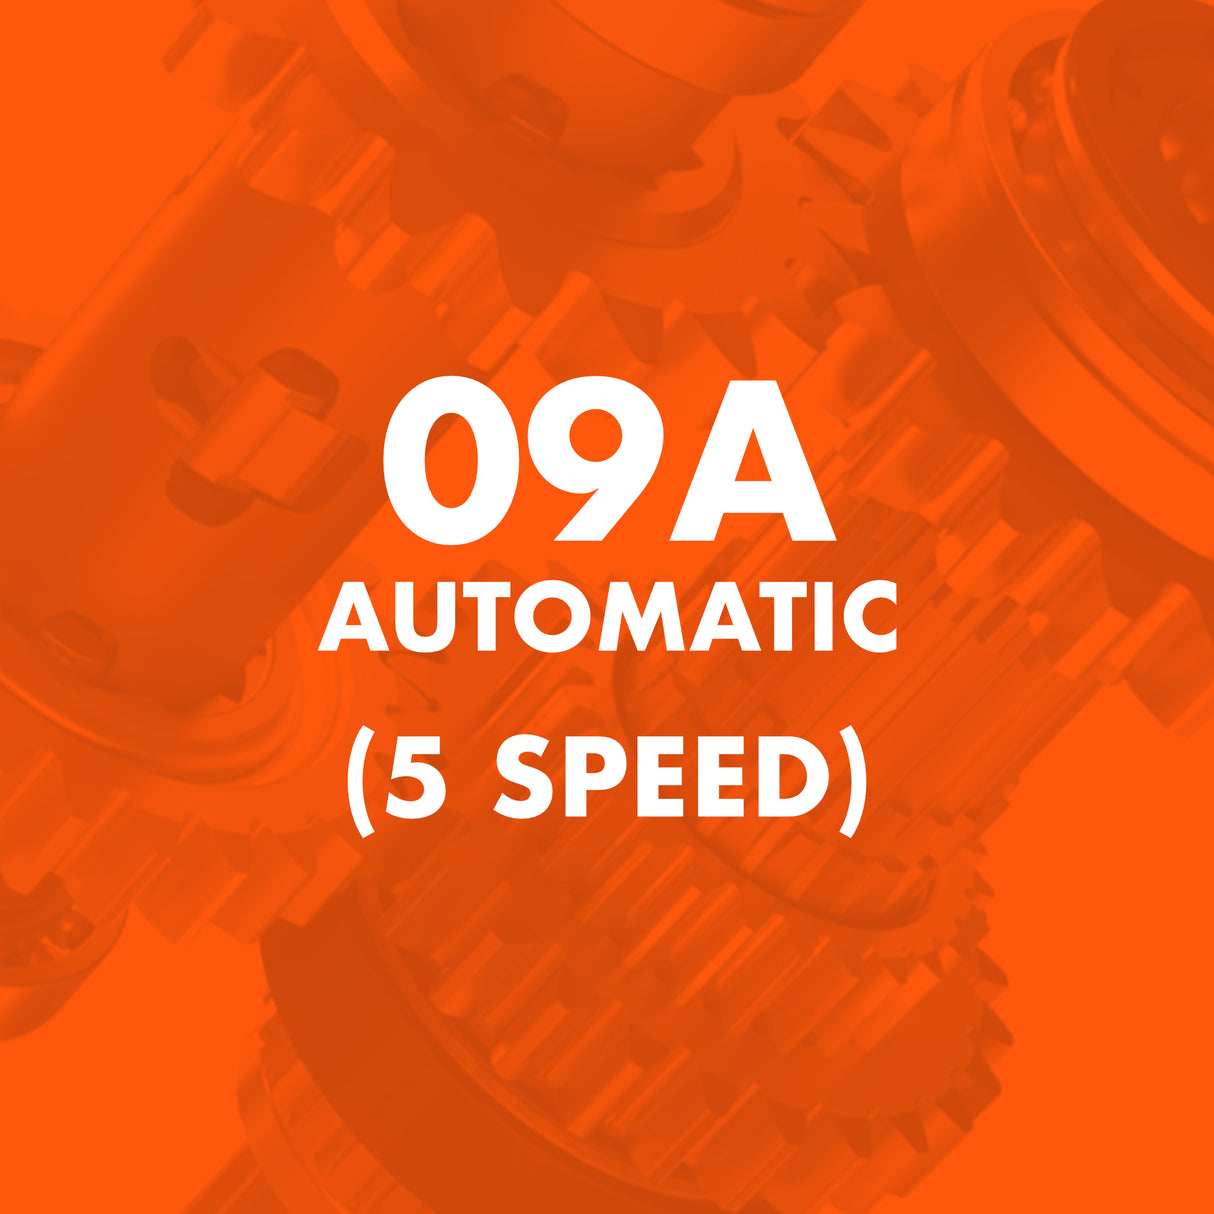 09A Automatic (5 Speed) Catalogue